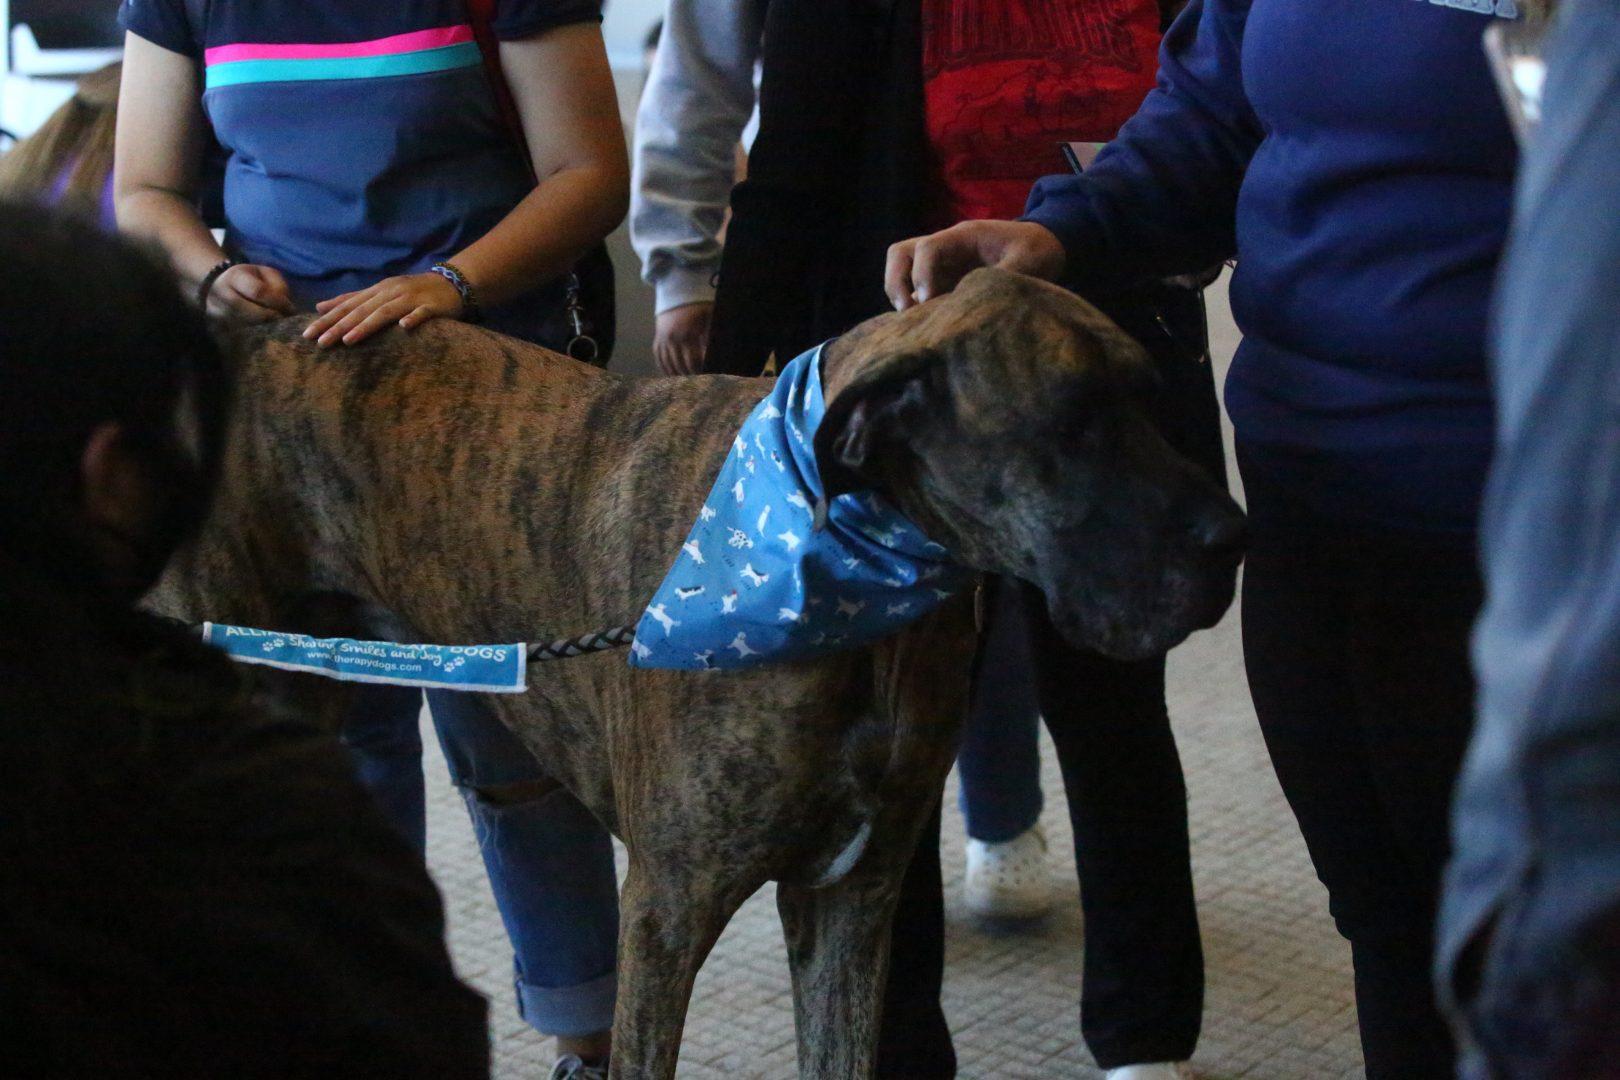 The Healthy Campus Week events began with pet therapy on Monday, March 14. (JesÃºs Cano/The Collegian)